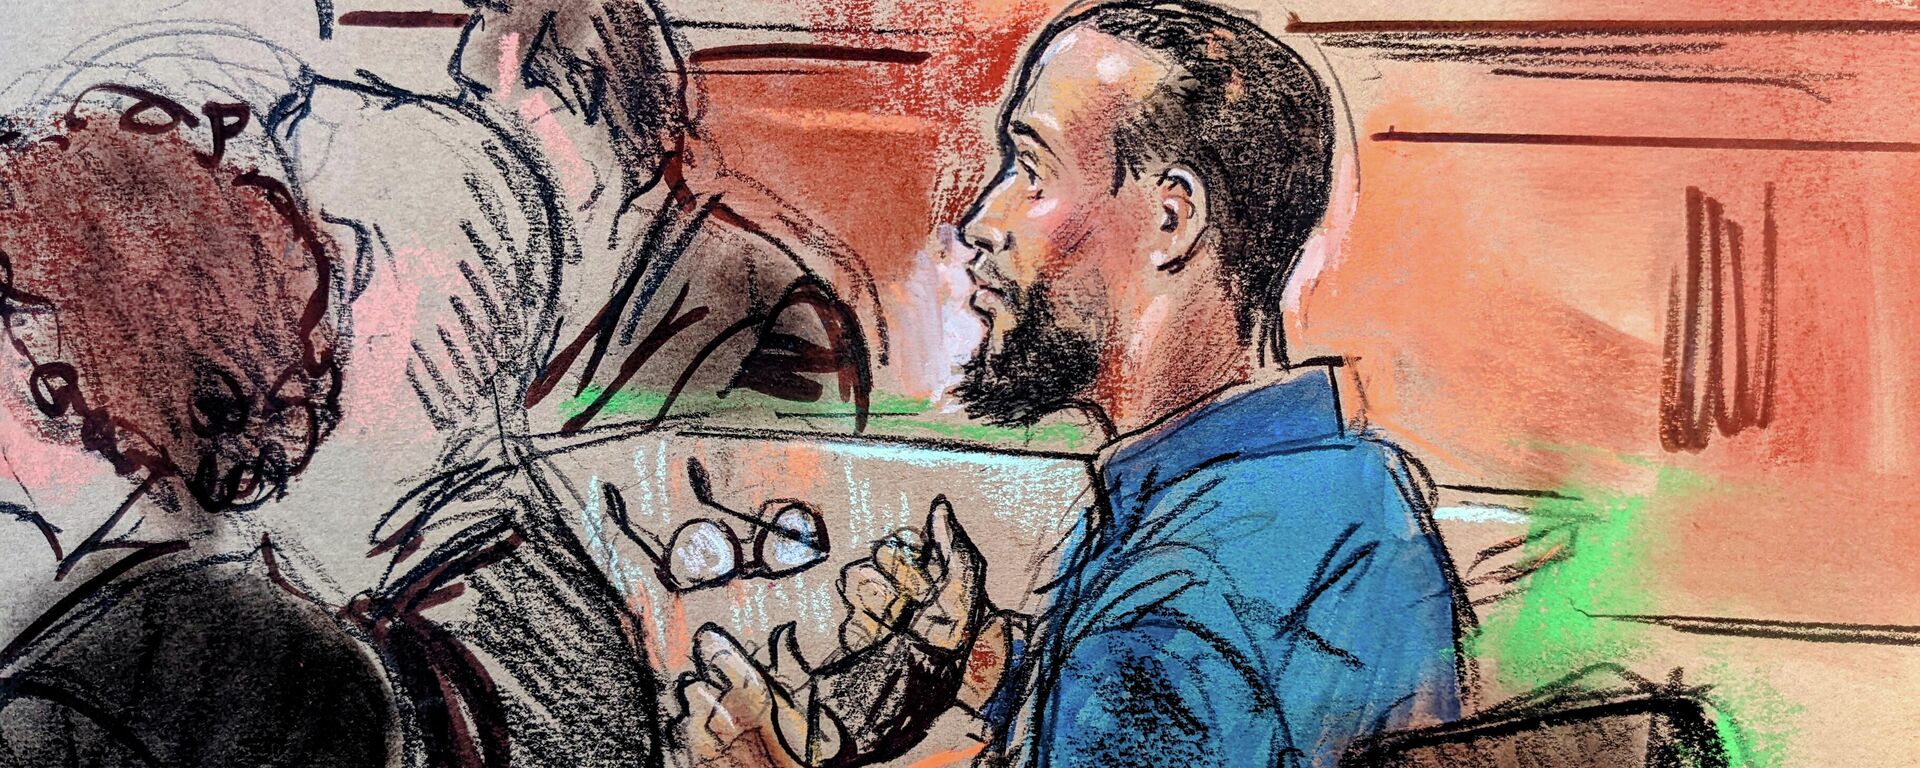 El Shafee Elsheikh, a former British national accused of engaging in lethal hostage-taking and conspiracy to commit murder as an alleged member of an Islamic State cell nicknamed the Beatles that operated in Syria and Iraq, takes off his face mask and glasses for identification purposes as he attends testimony in his trial in U.S. federal court in Alexandria, Virginia, U.S. April 1, 2022. - Sputnik International, 1920, 08.04.2022